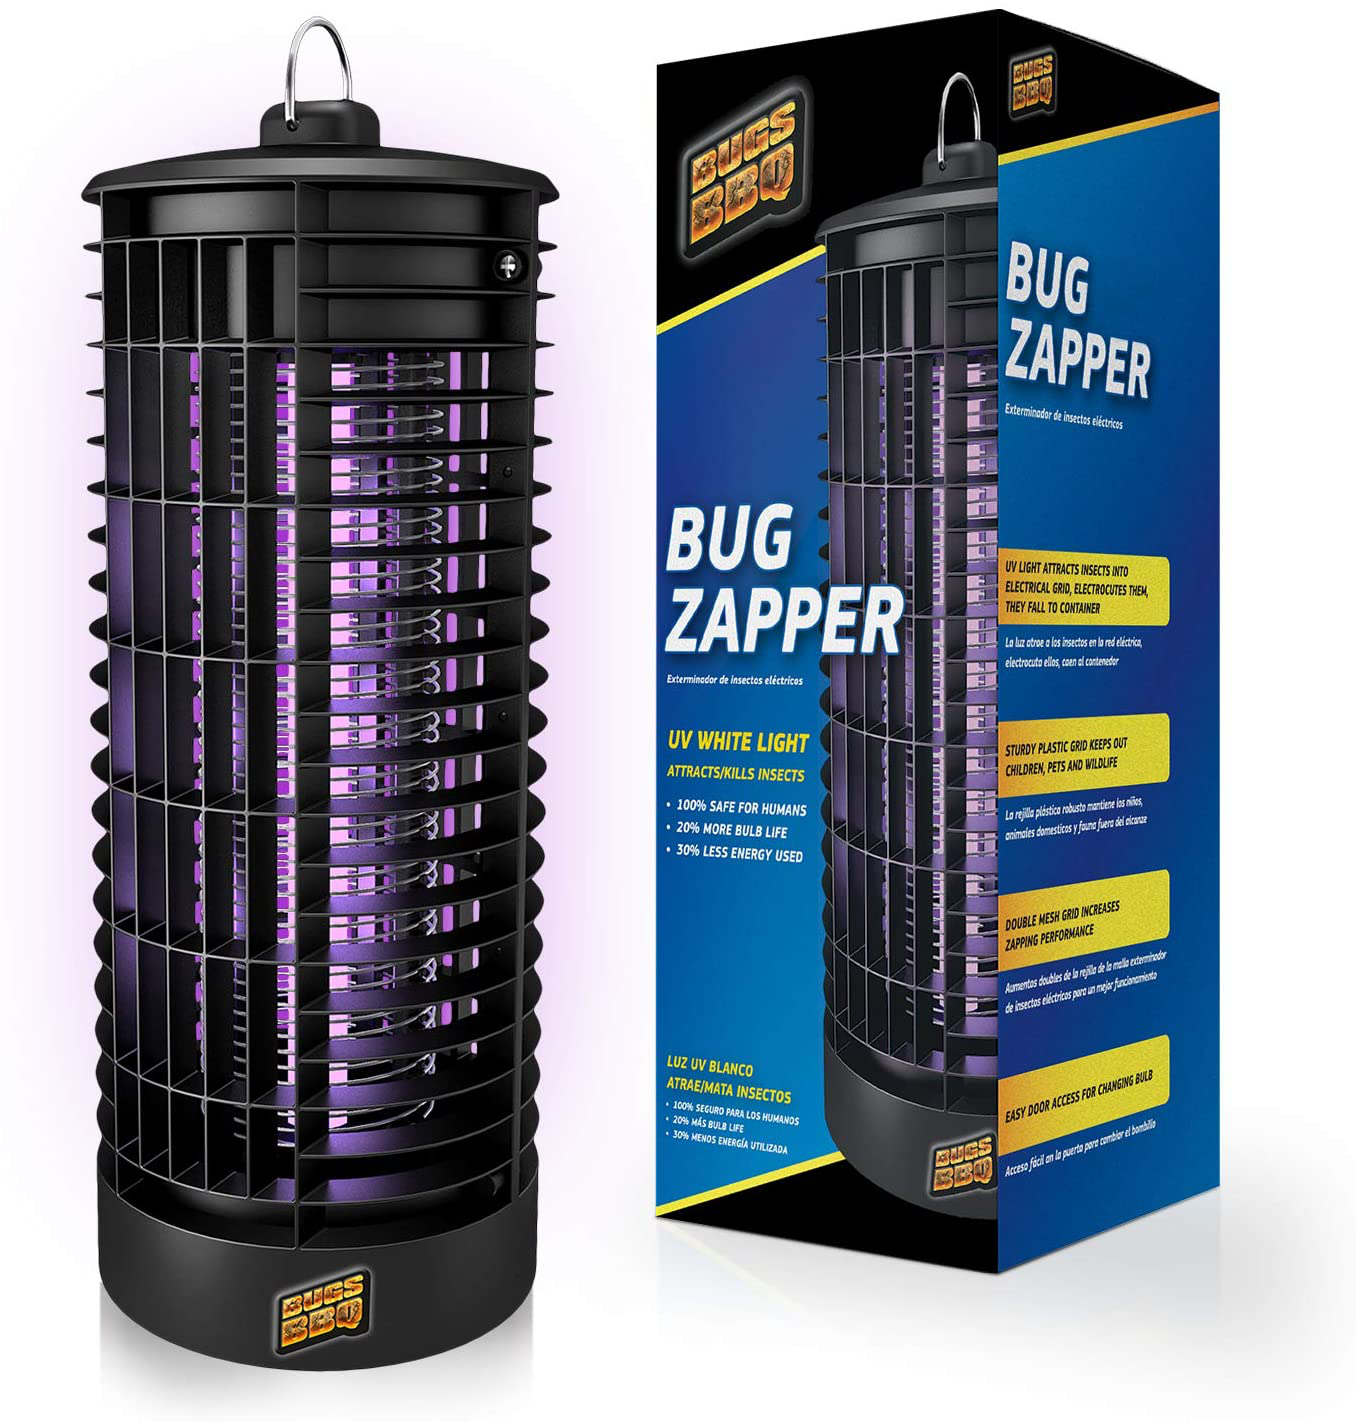 Bug Zapper Indoor and Outdoor - Insects Killer - Fly Trap Outdoor Patio - Insect Killer Zapper - Mosquito Trap - Insect Zapper - Mosquito Attractant Trap - Fly Zapper - Bug Zapper Table Top (Black)